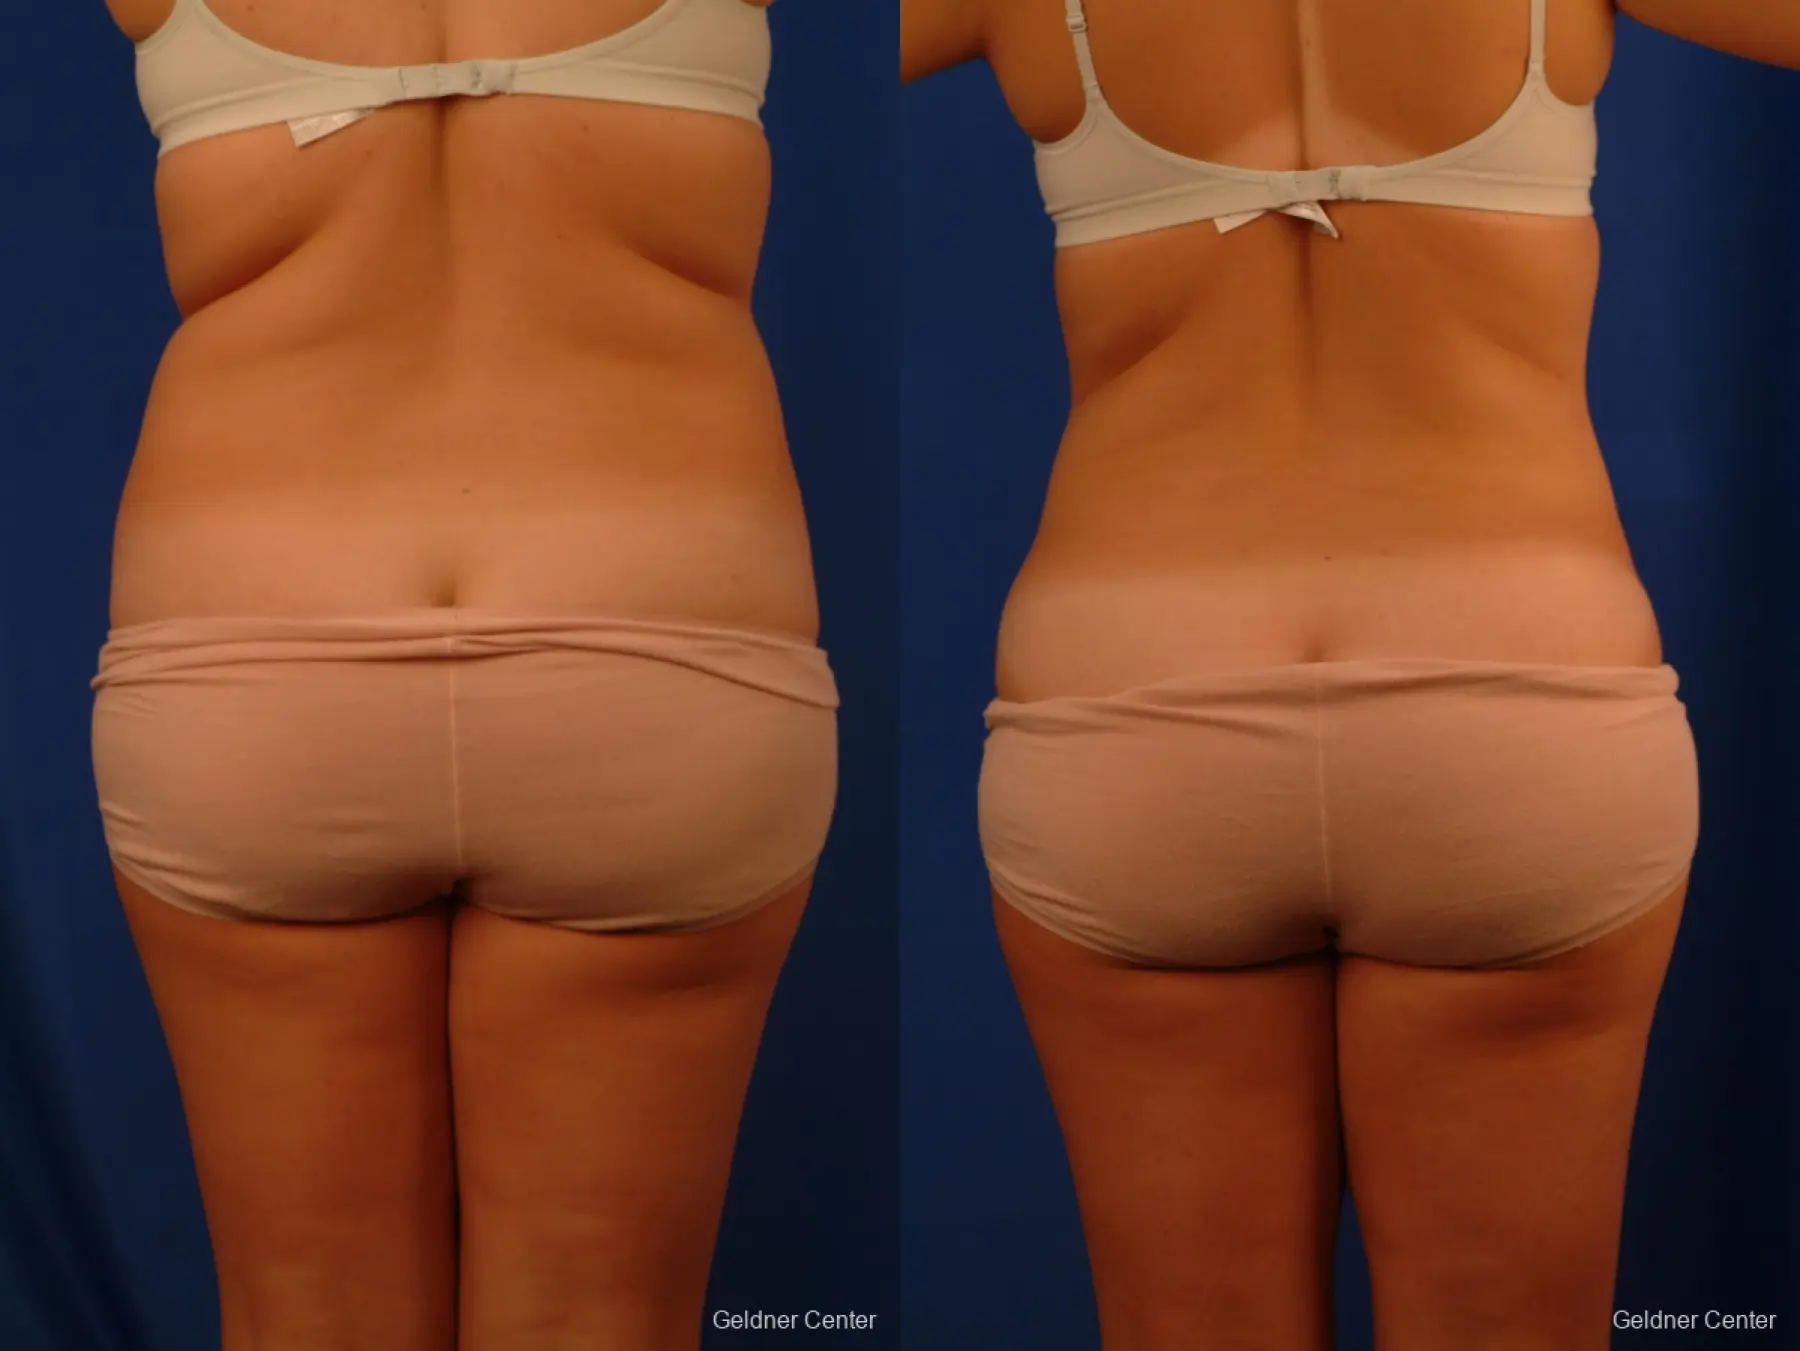 Vaser lipo patient 2514 before and after photos - Before and After 4